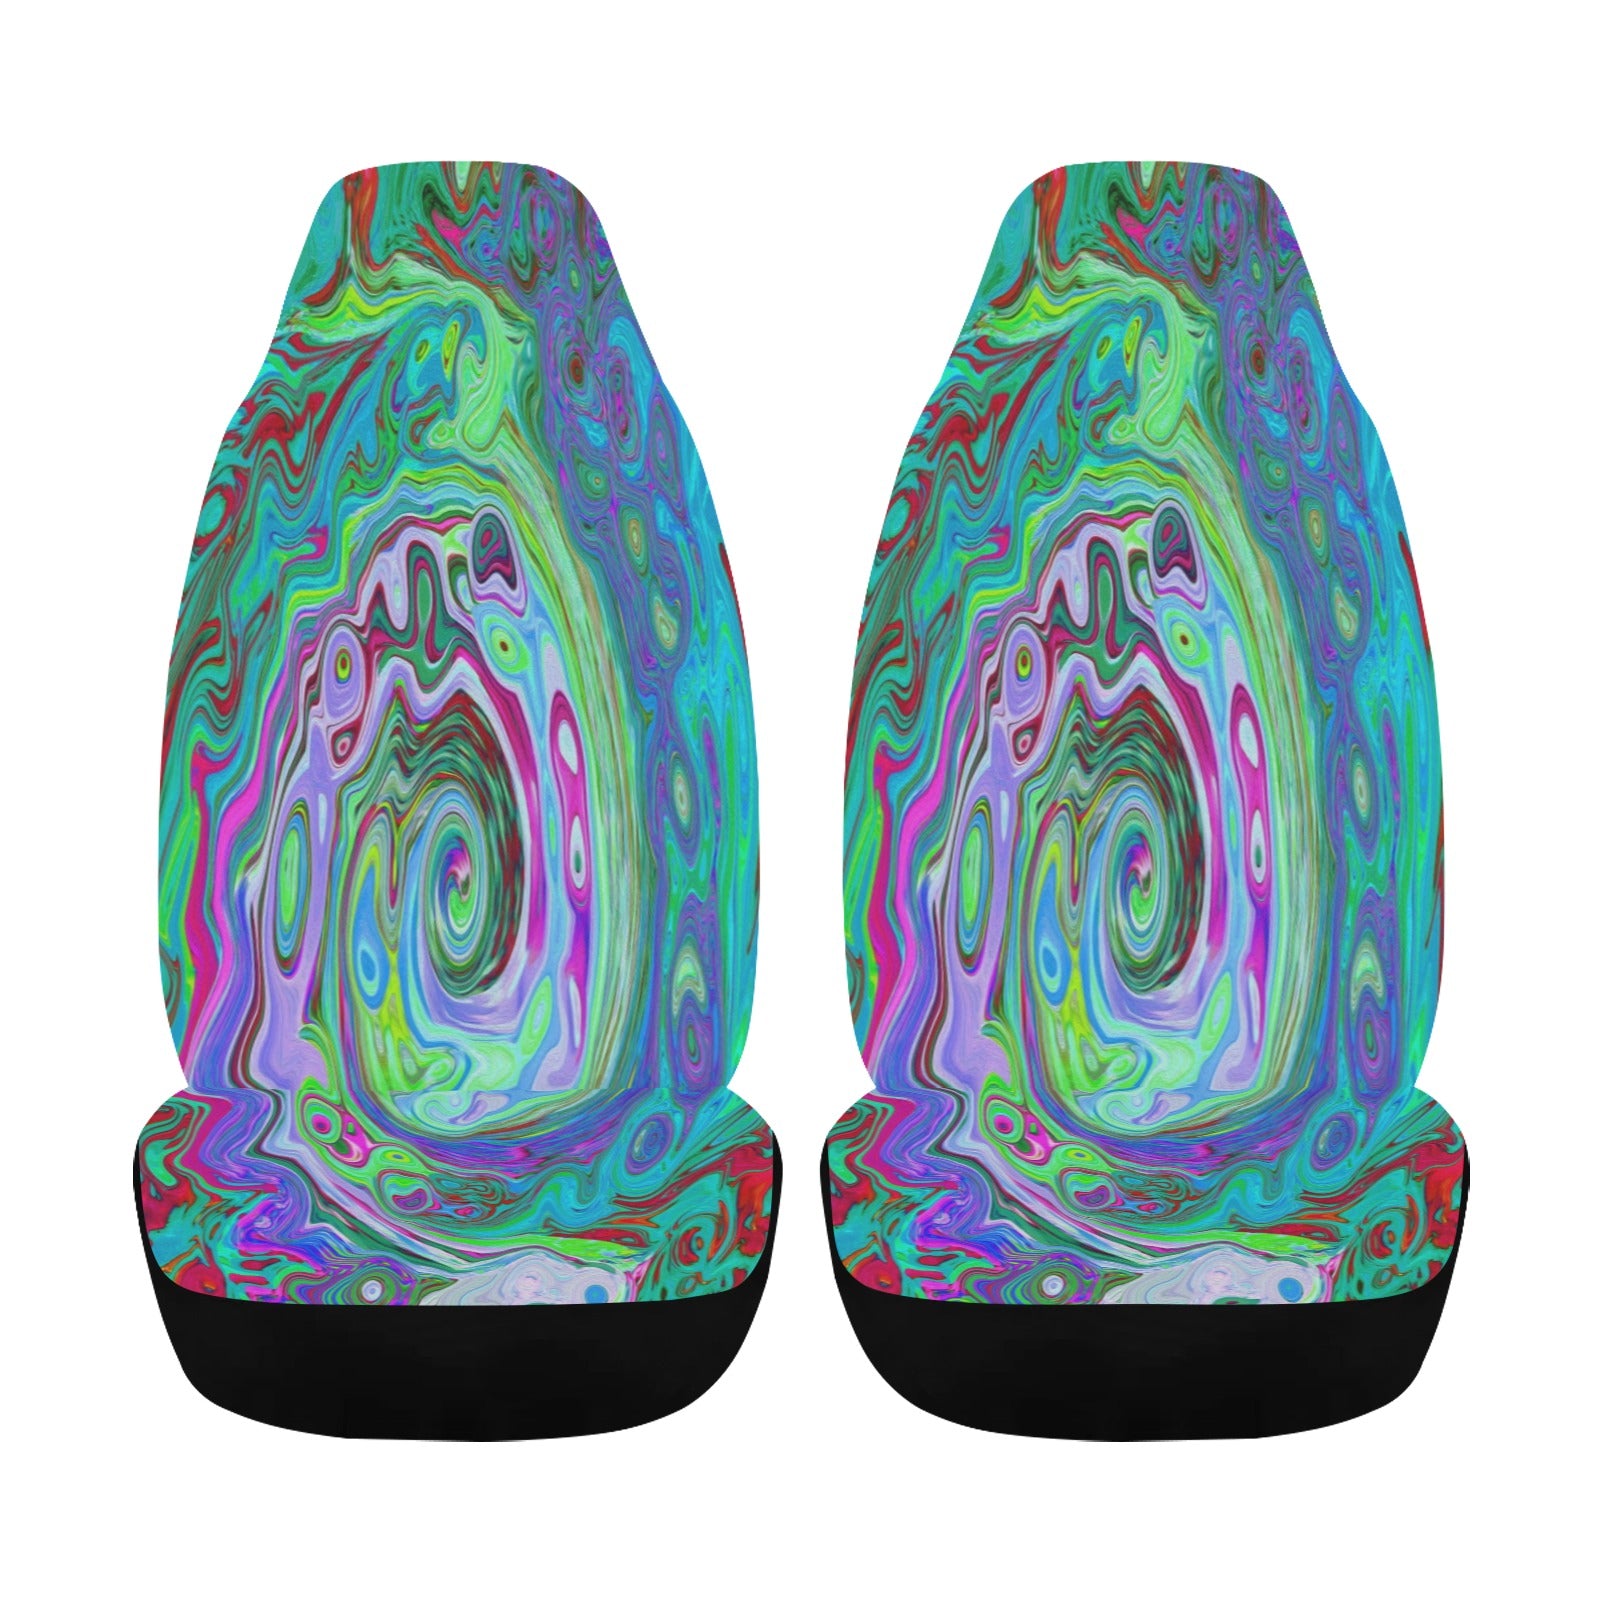 Car Seat Covers, Retro Green, Red and Magenta Abstract Groovy Swirl